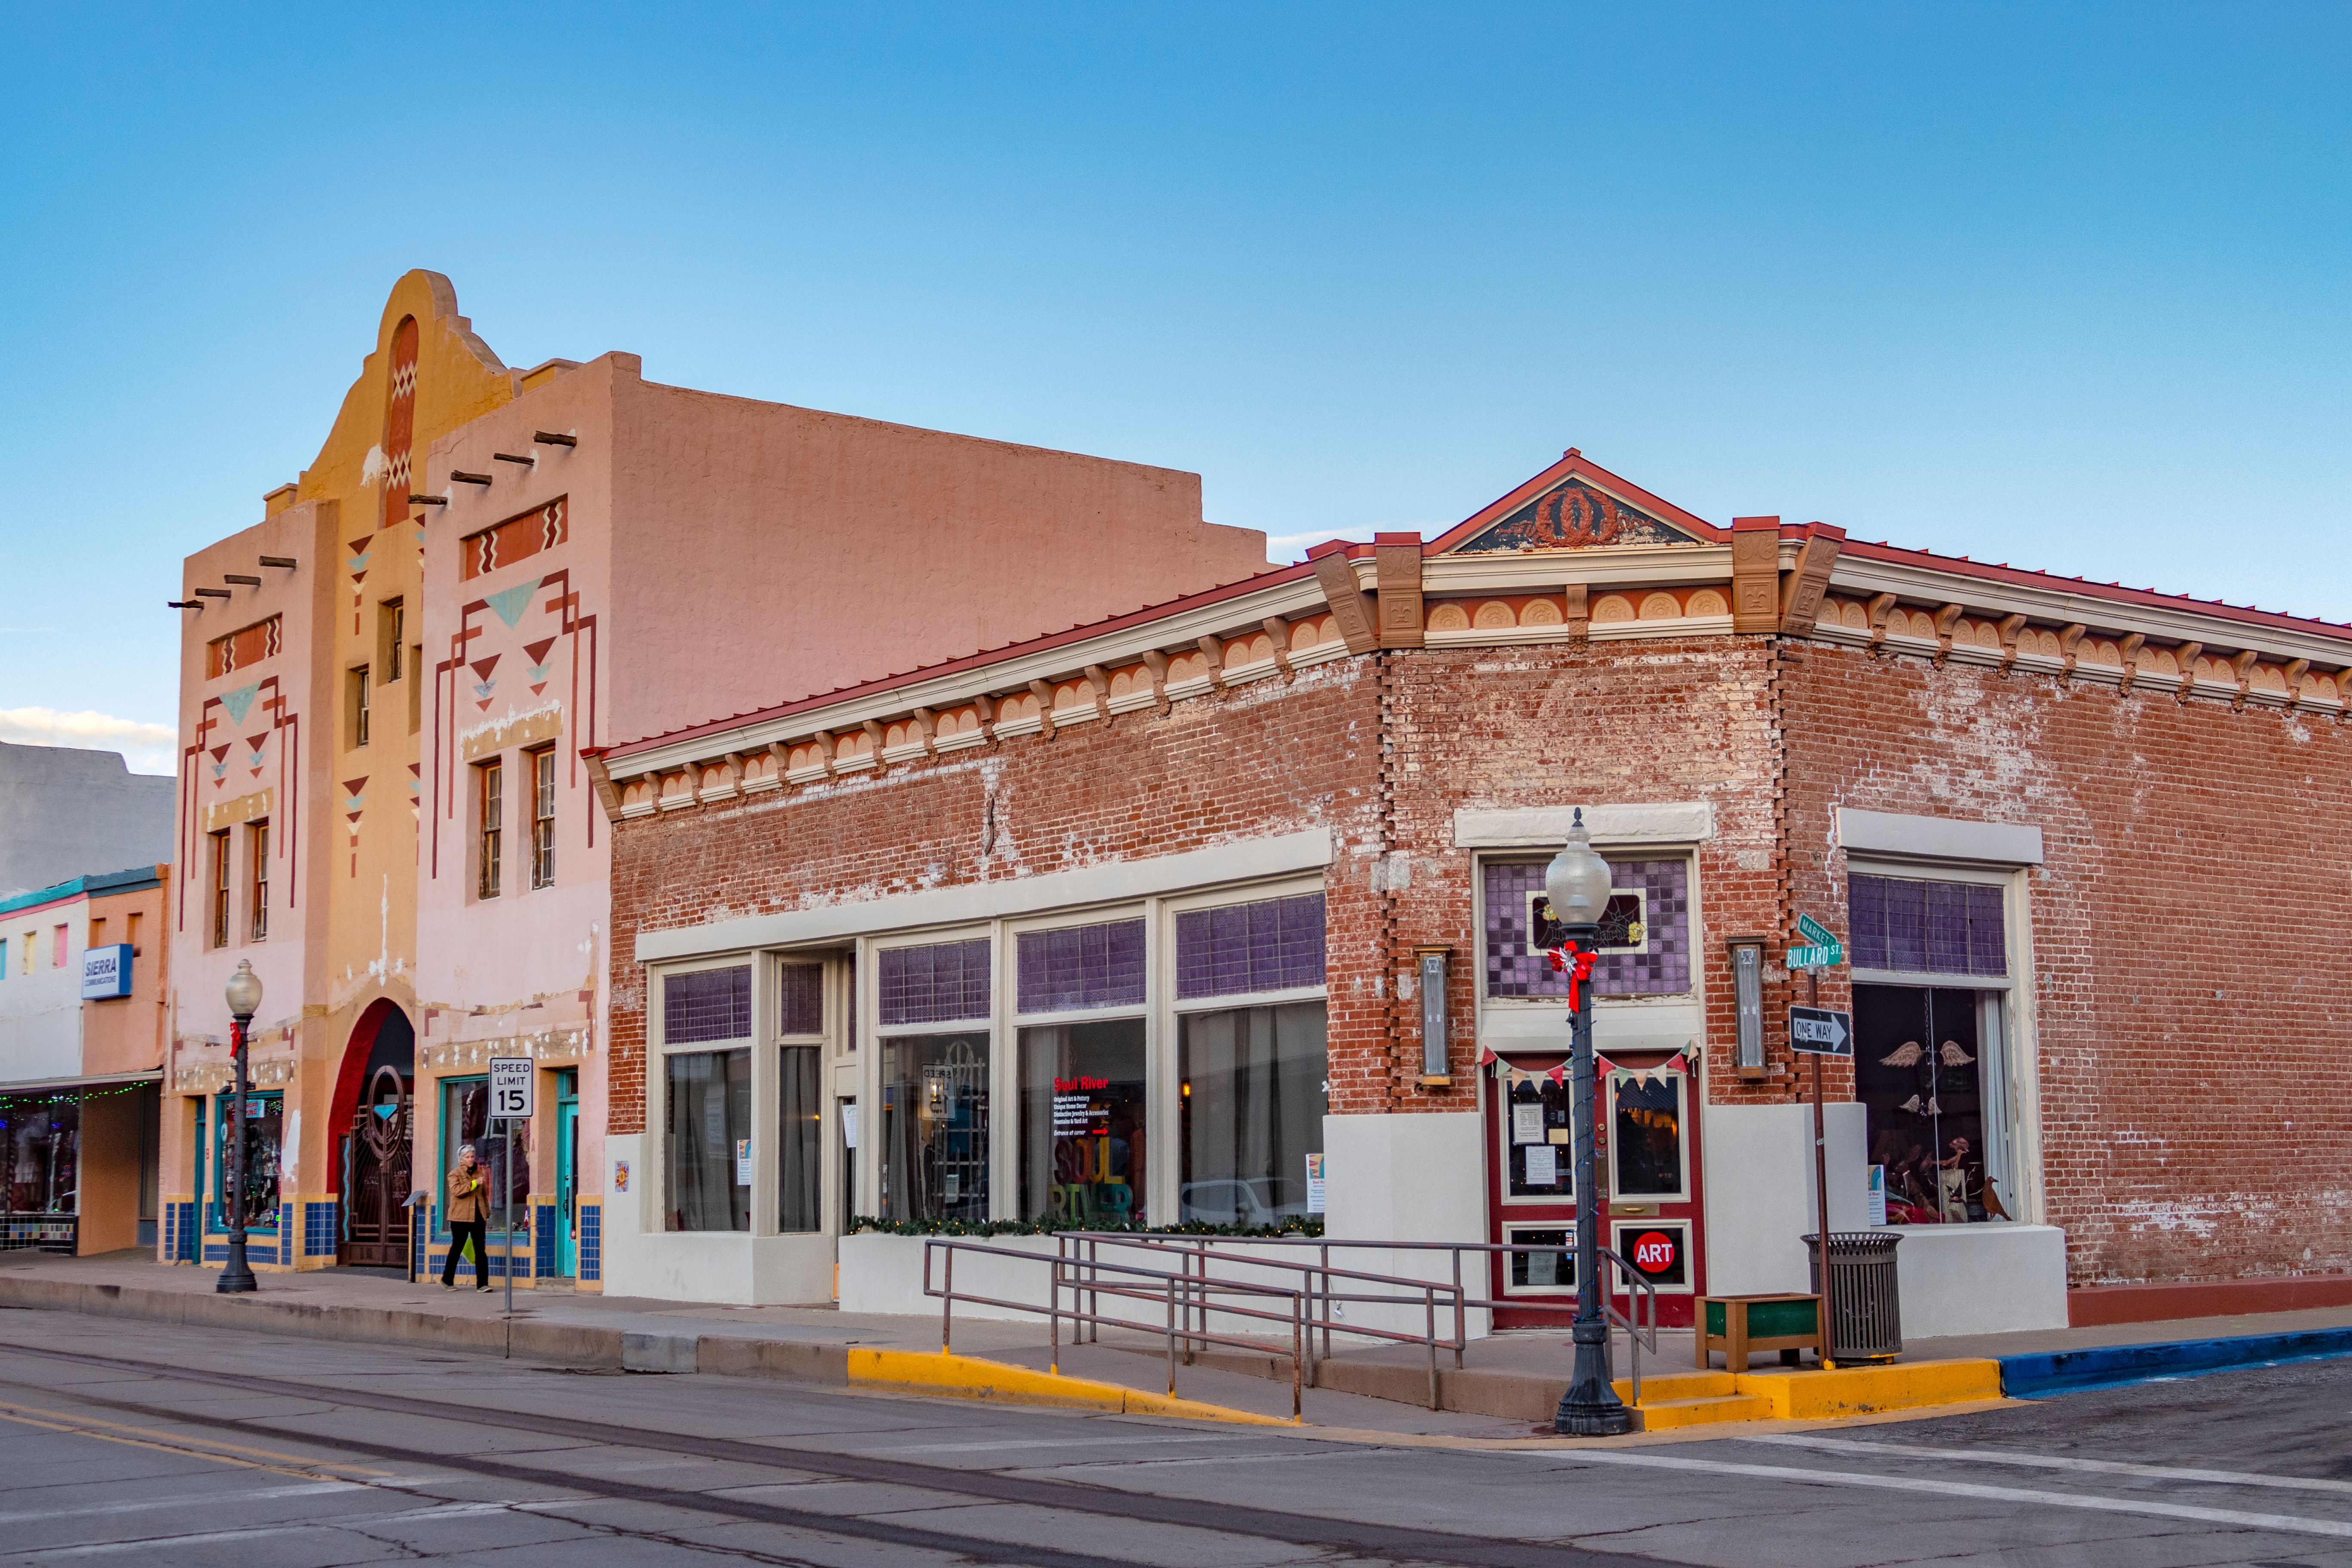 Historic building in Silver City